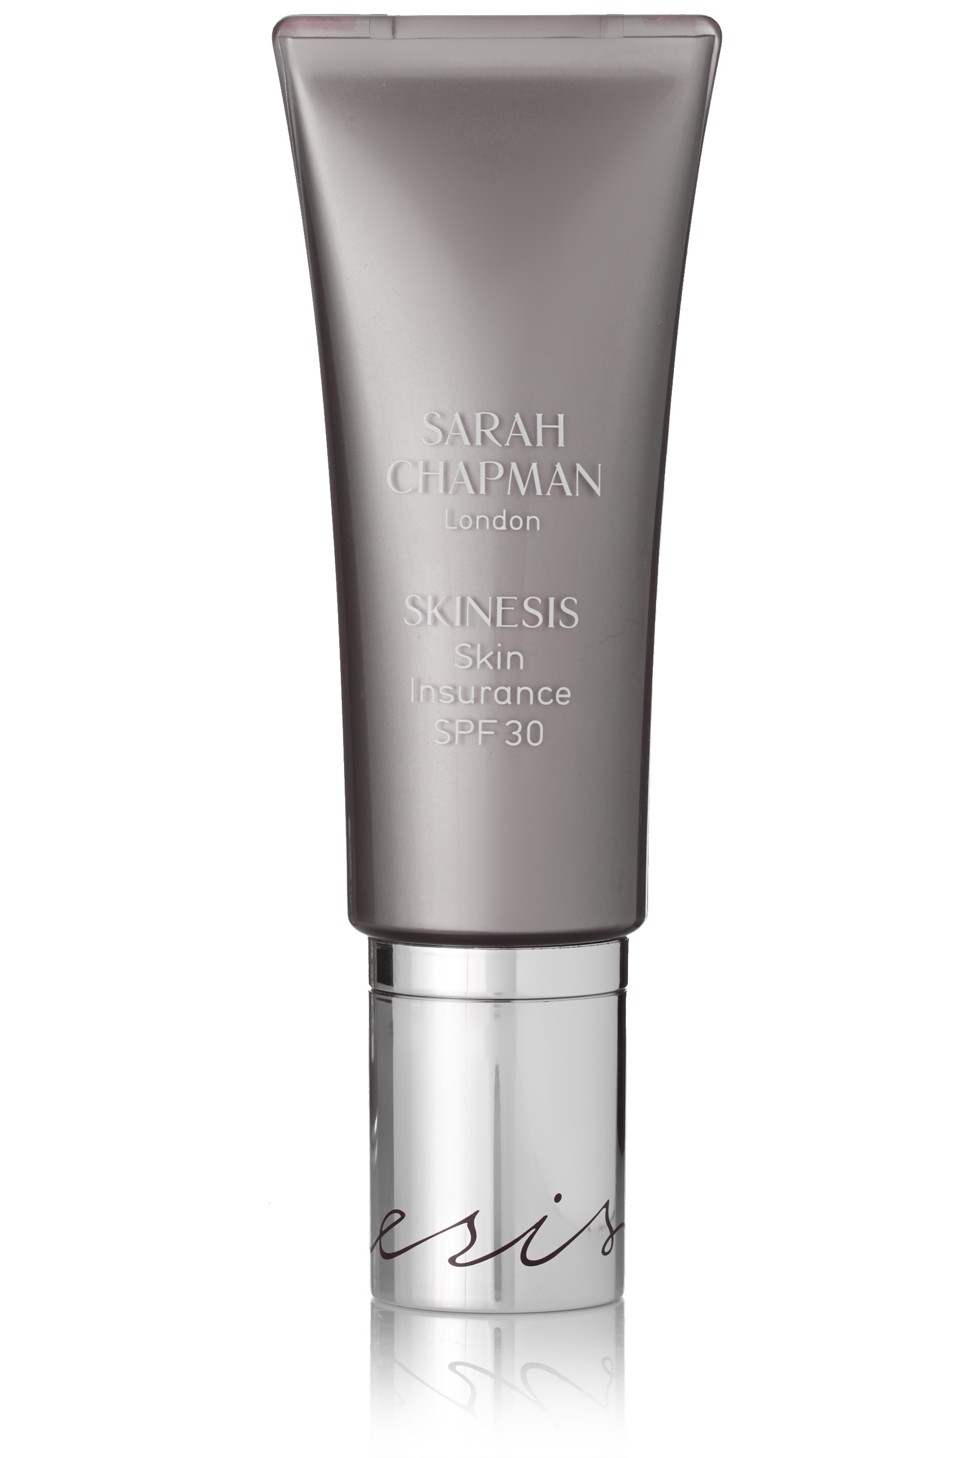 Sarah Chapman Skin Insurance is a protective moisturiser which protects and replenishes the skin.